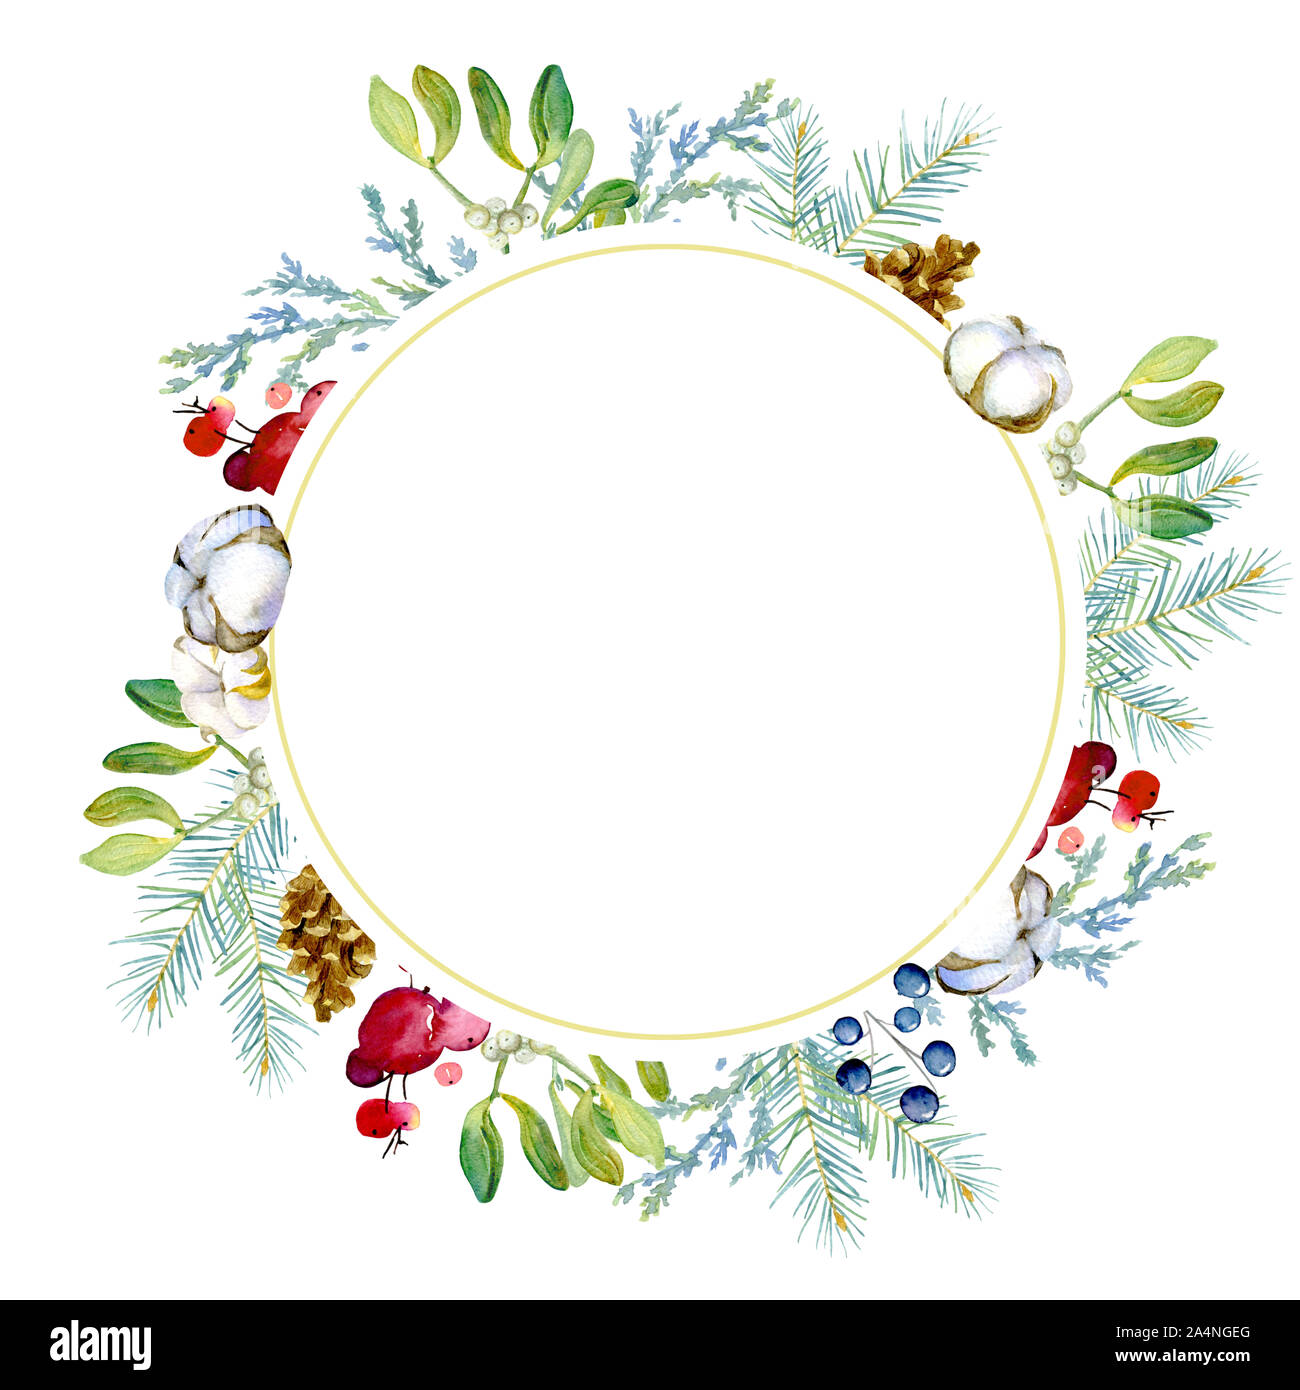 Round frame made up of fir and juniper branches, cones, red and blue berries, cotton bolls. Beautiful background for cards and invitations or other de Stock Photo